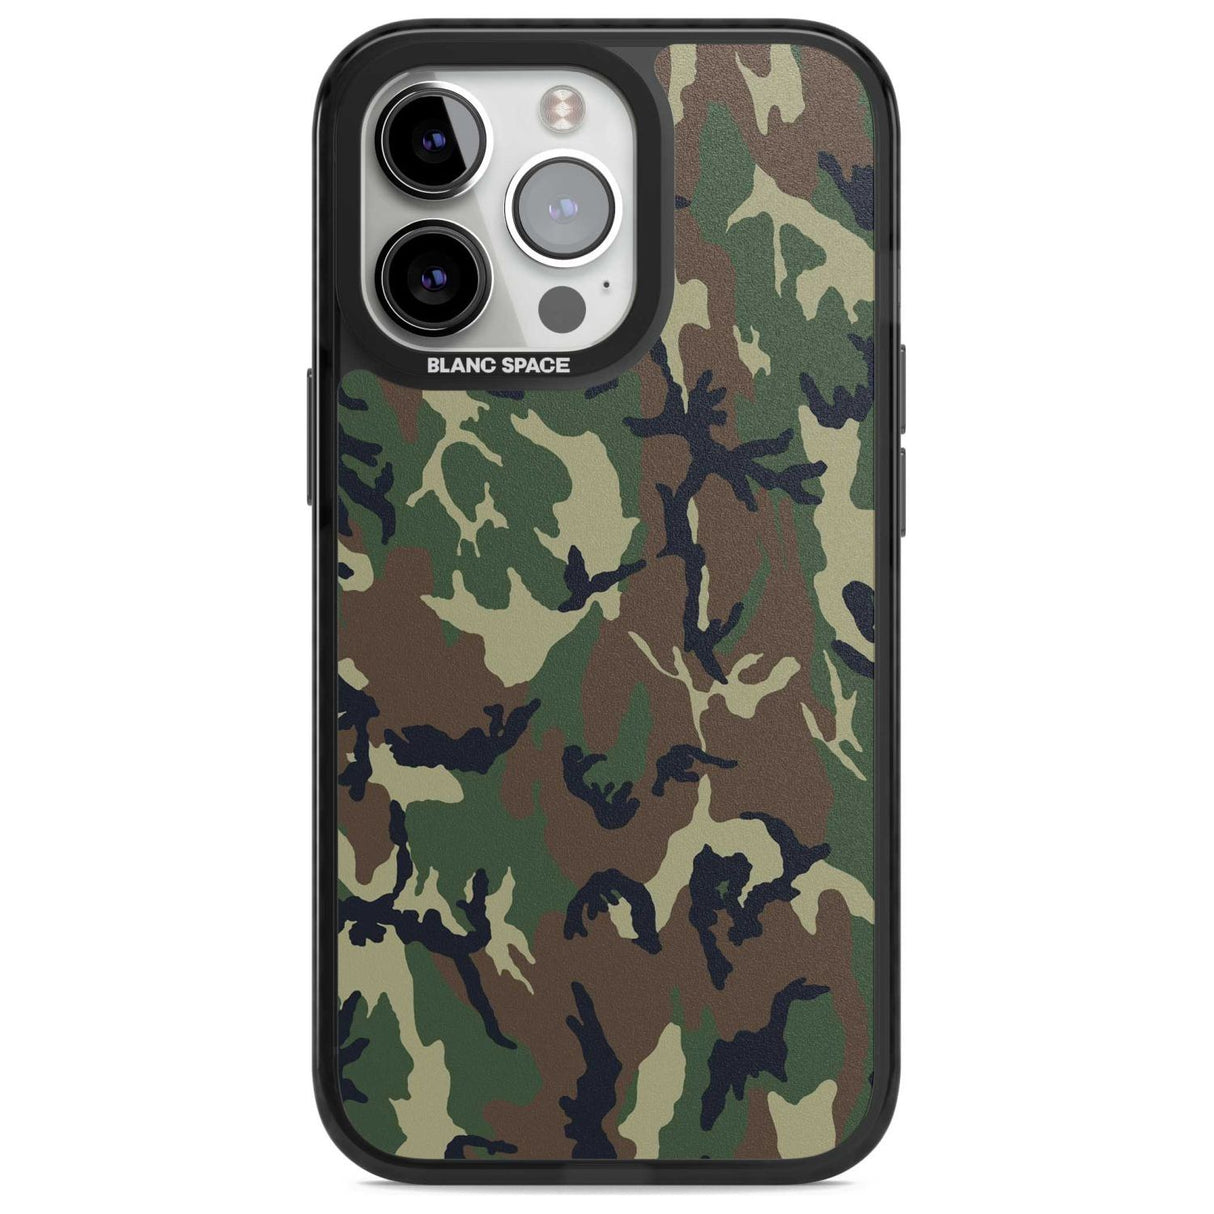 Forest Green Camo Phone Case iPhone 15 Pro / Magsafe Black Impact Case,iPhone 15 Pro Max / Magsafe Black Impact Case,iPhone 14 Pro Max / Magsafe Black Impact Case,iPhone 13 Pro / Magsafe Black Impact Case,iPhone 14 Pro / Magsafe Black Impact Case Blanc Space